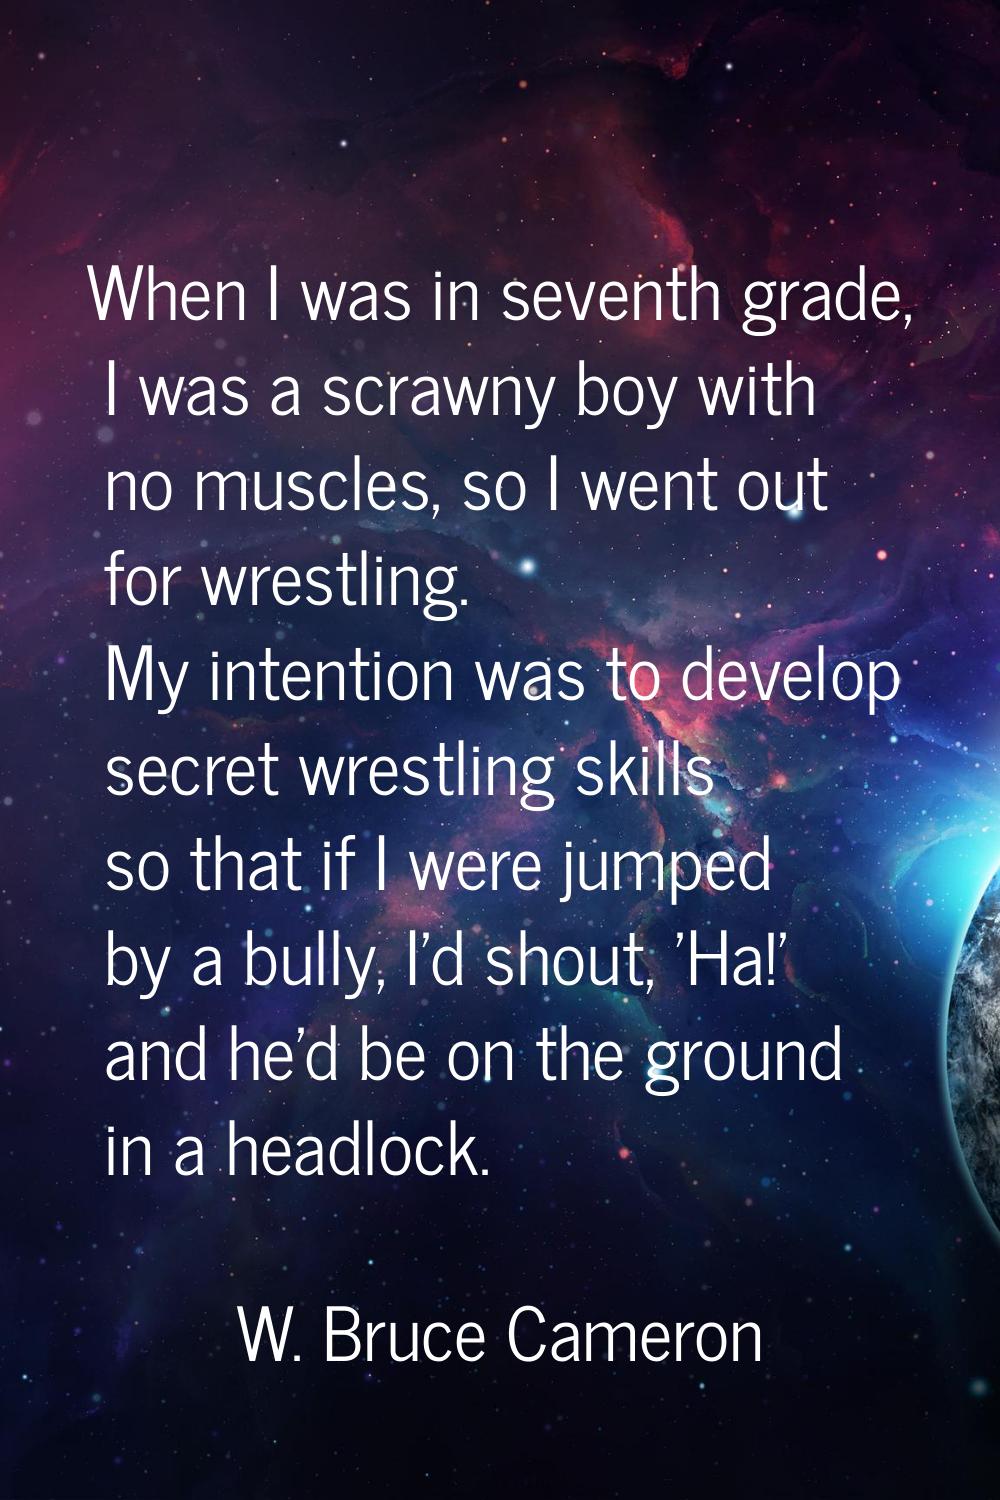 When I was in seventh grade, I was a scrawny boy with no muscles, so I went out for wrestling. My i